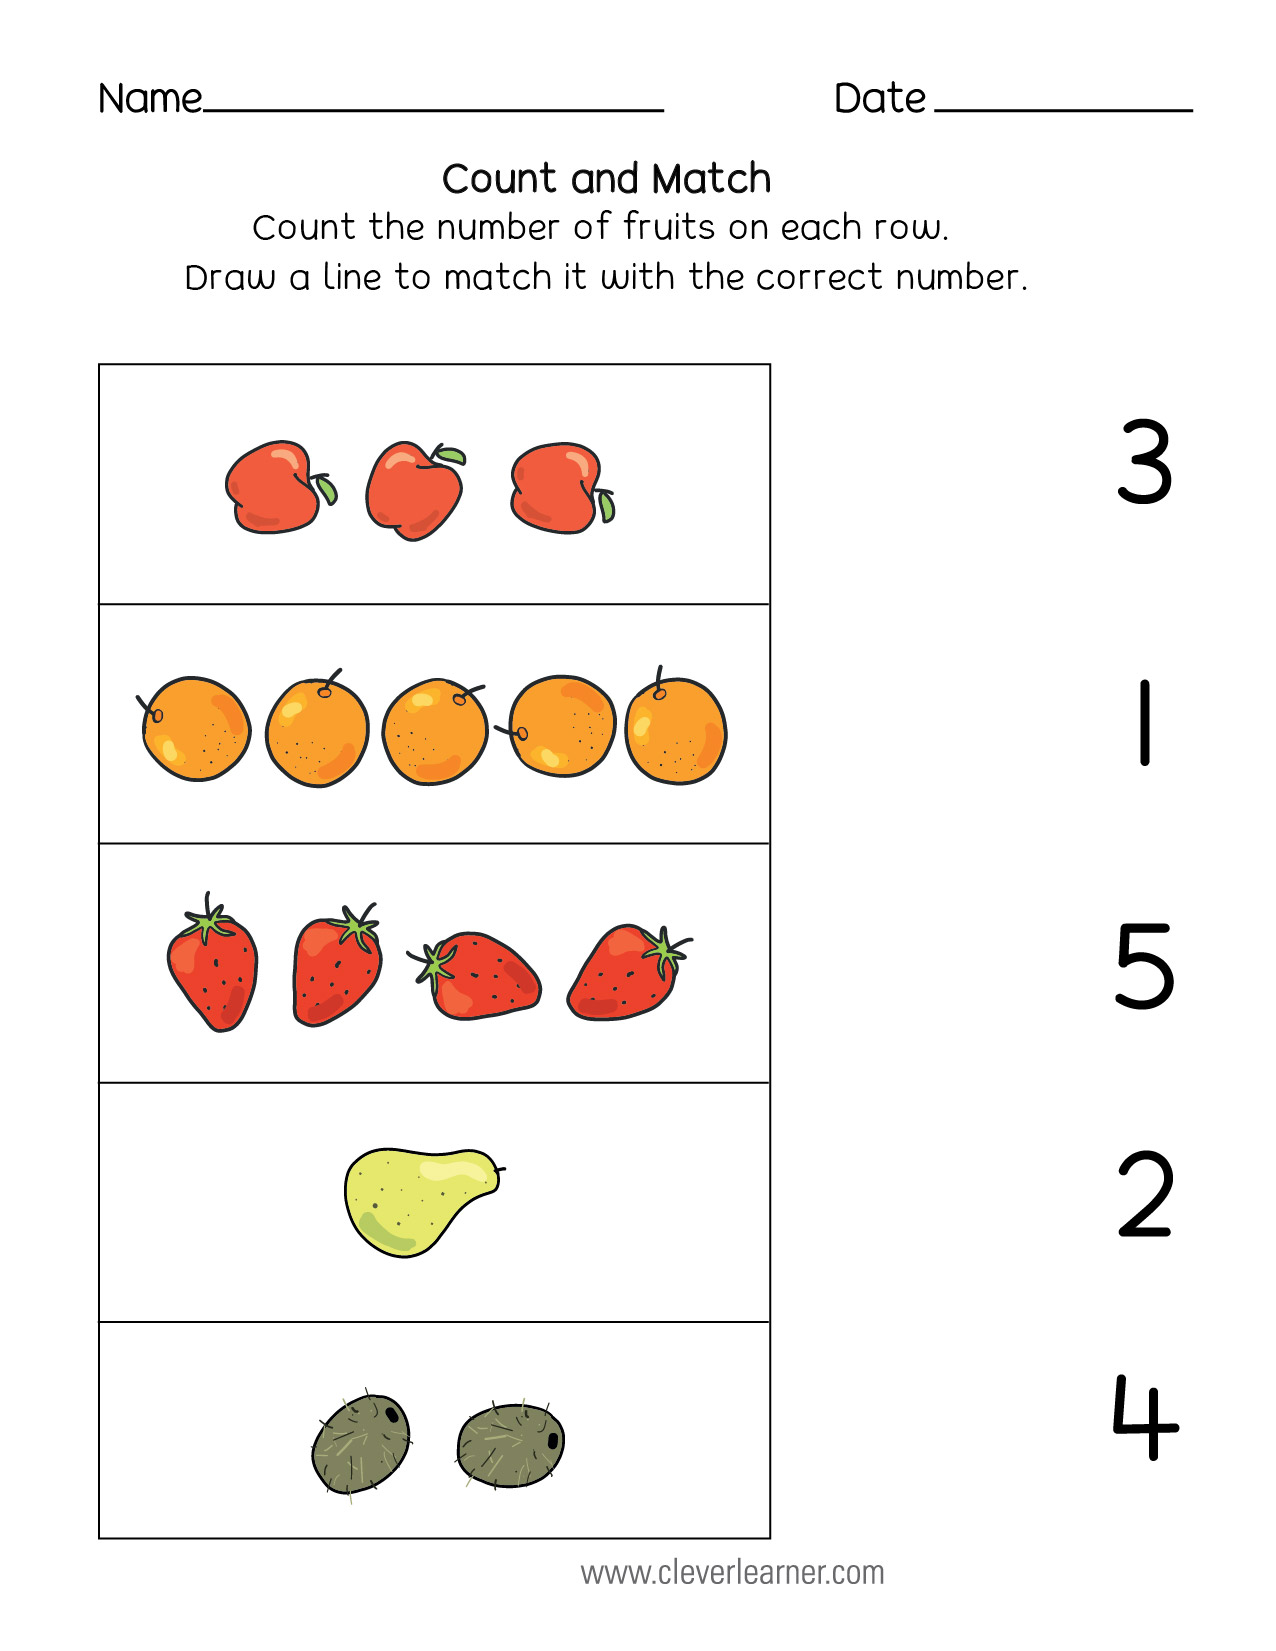 First Gradefree Printable Matching Worksheets For Numbers